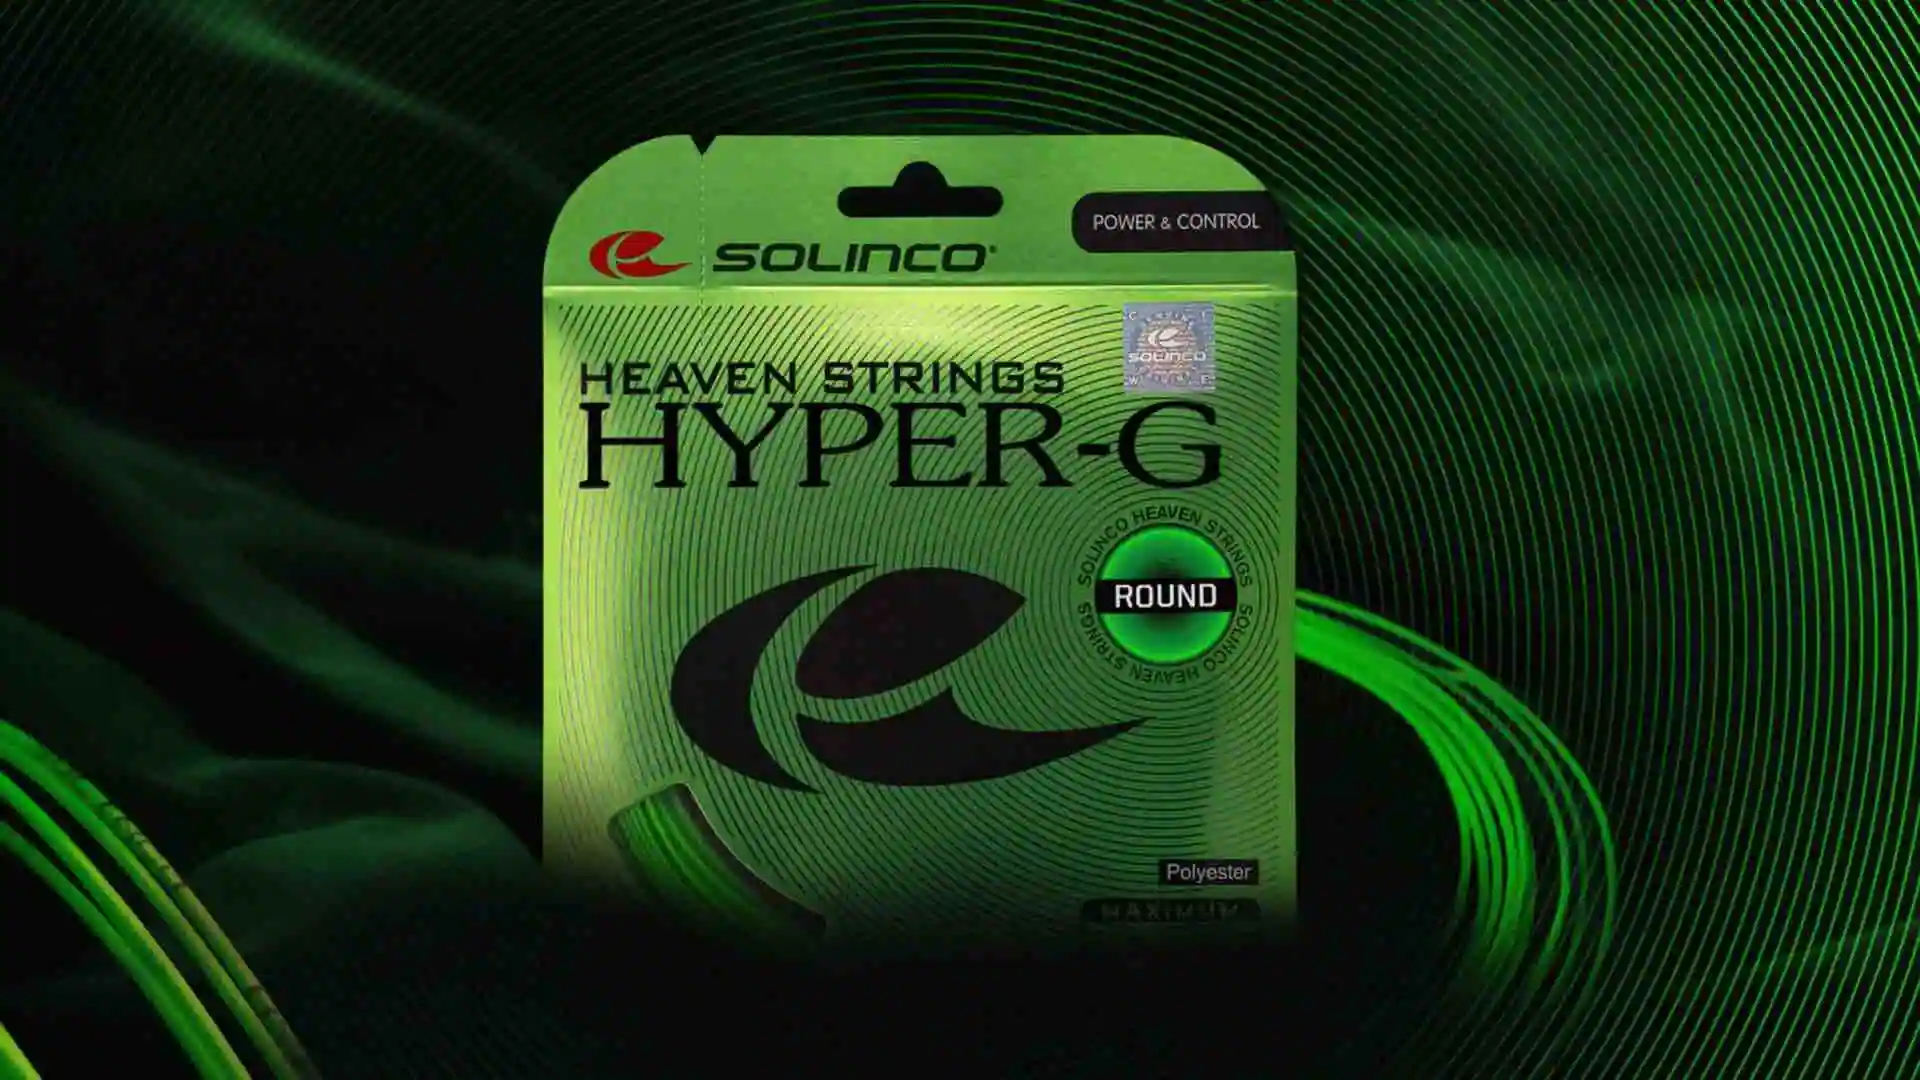 Solinco Hyper-G Round String Review 